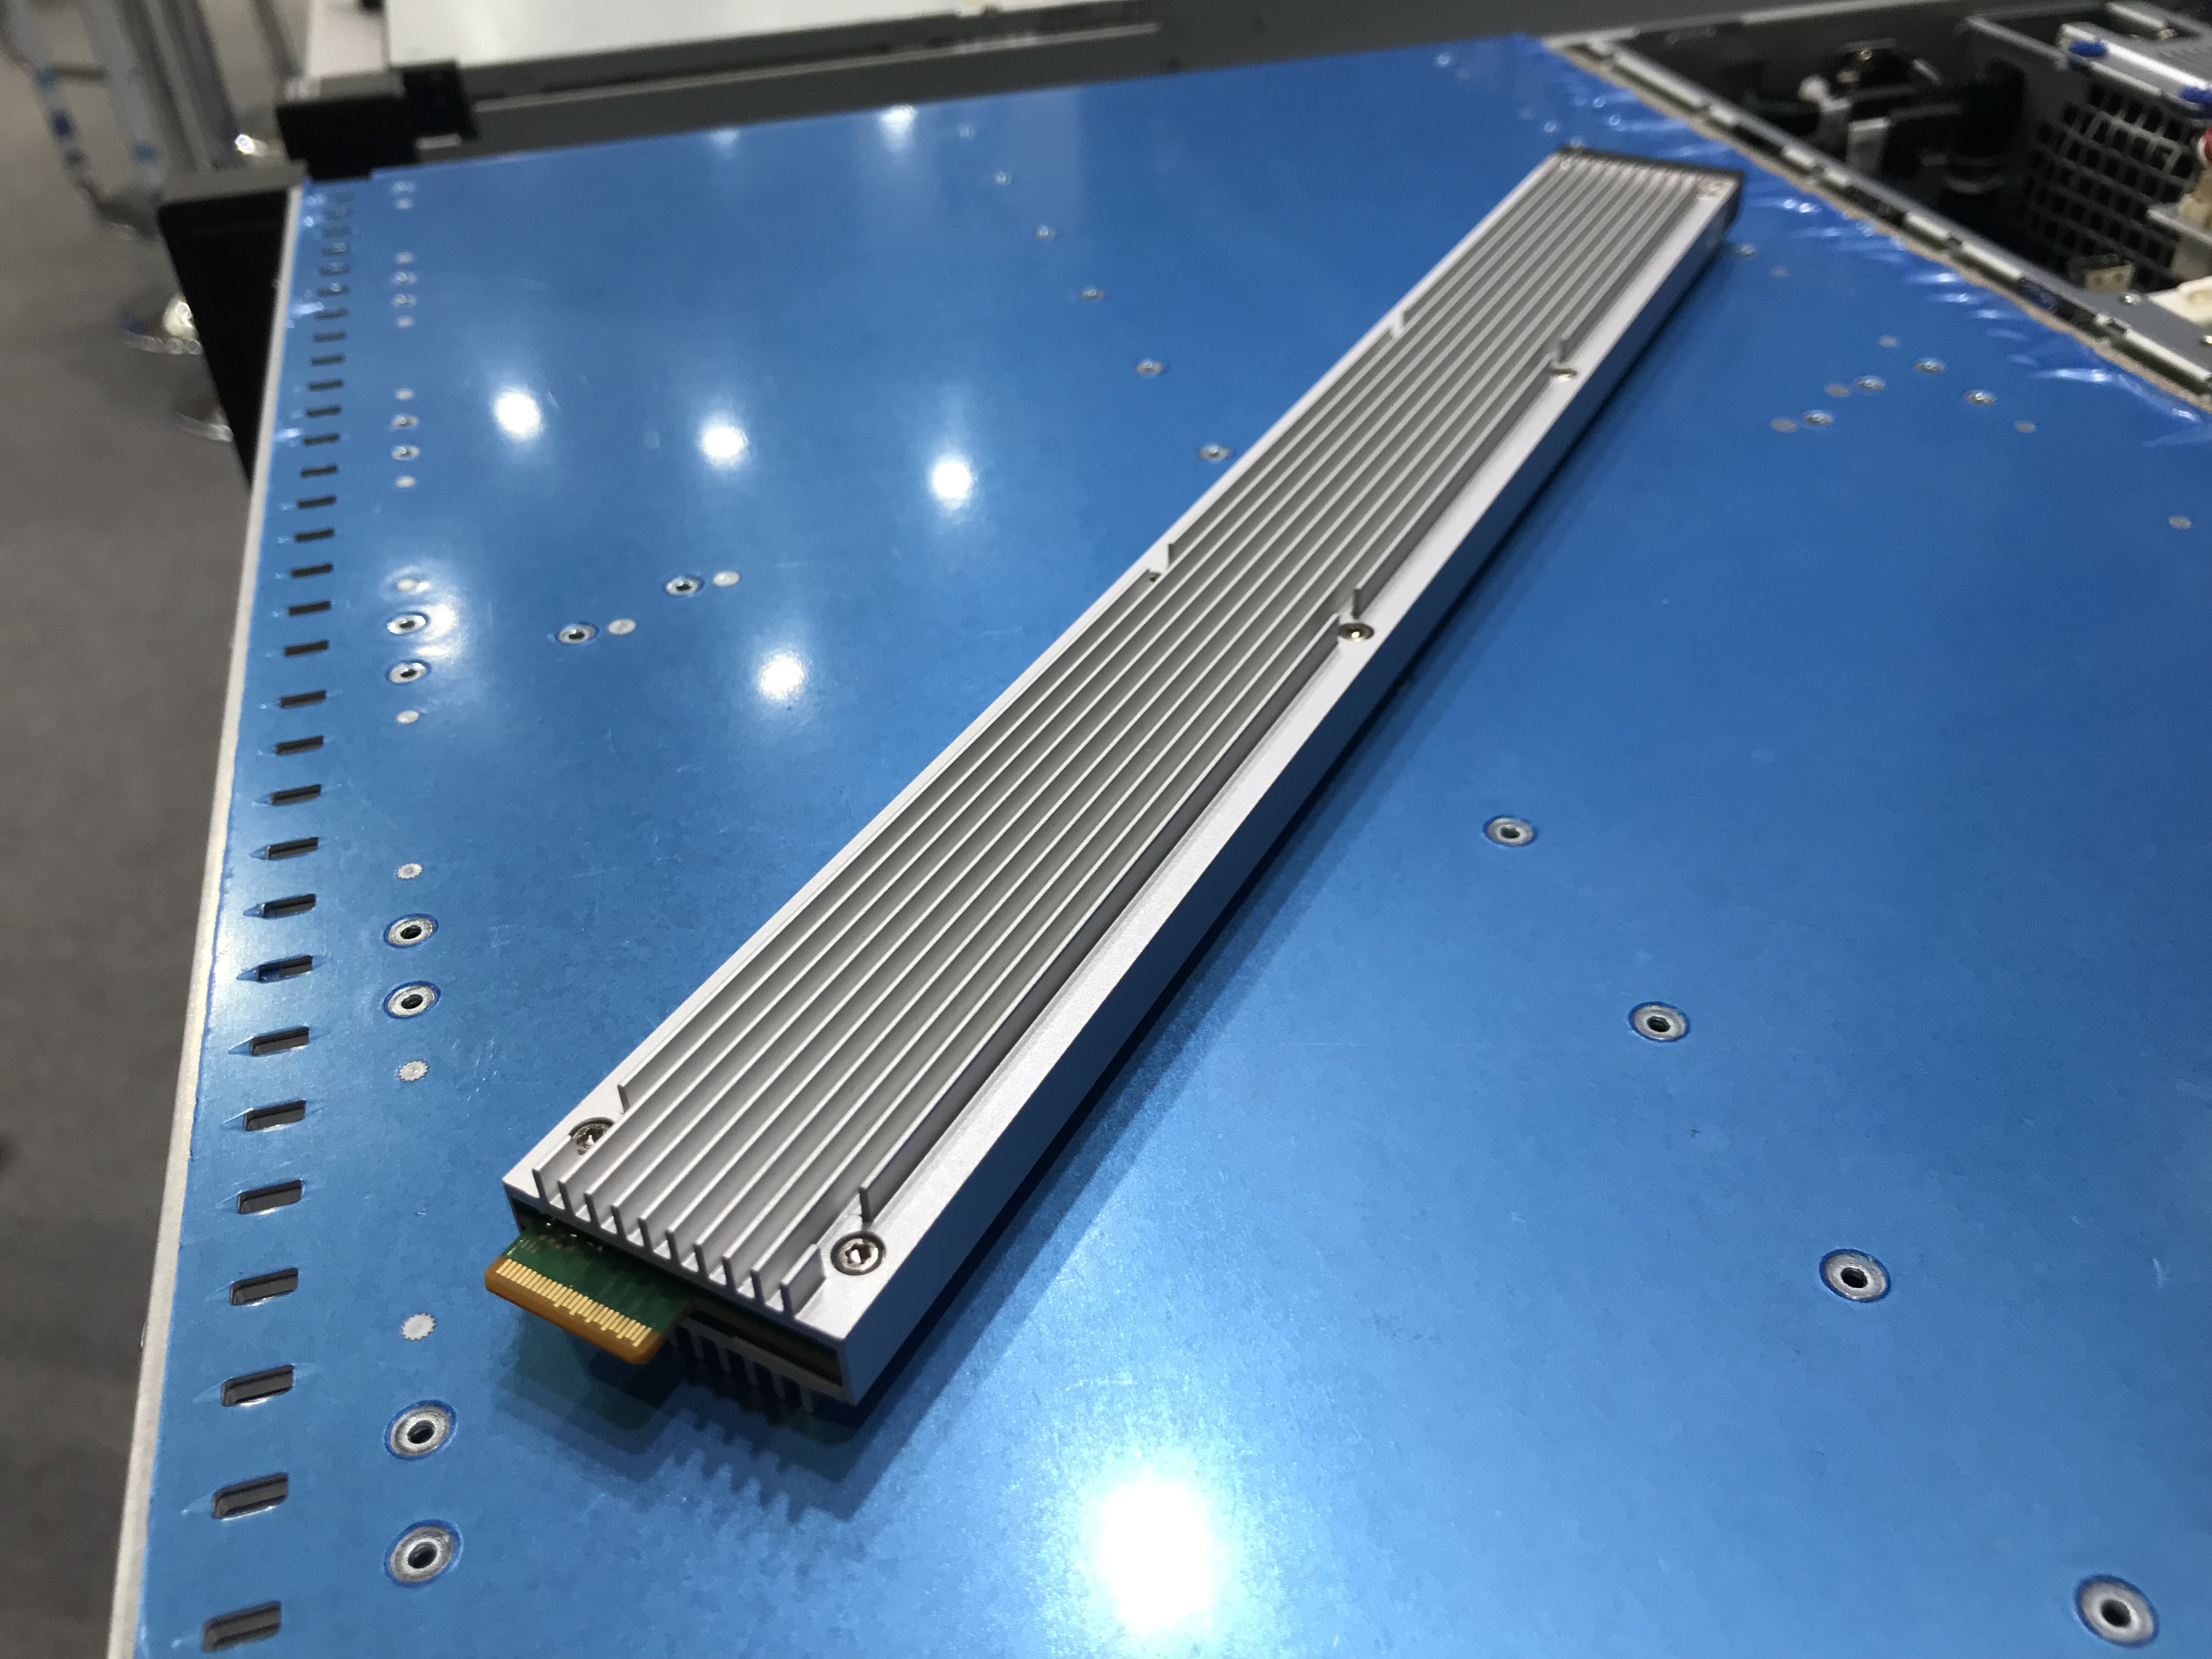 Spotted at Computex: An AMD EPYC-Based System with 108 Intel Ruler 